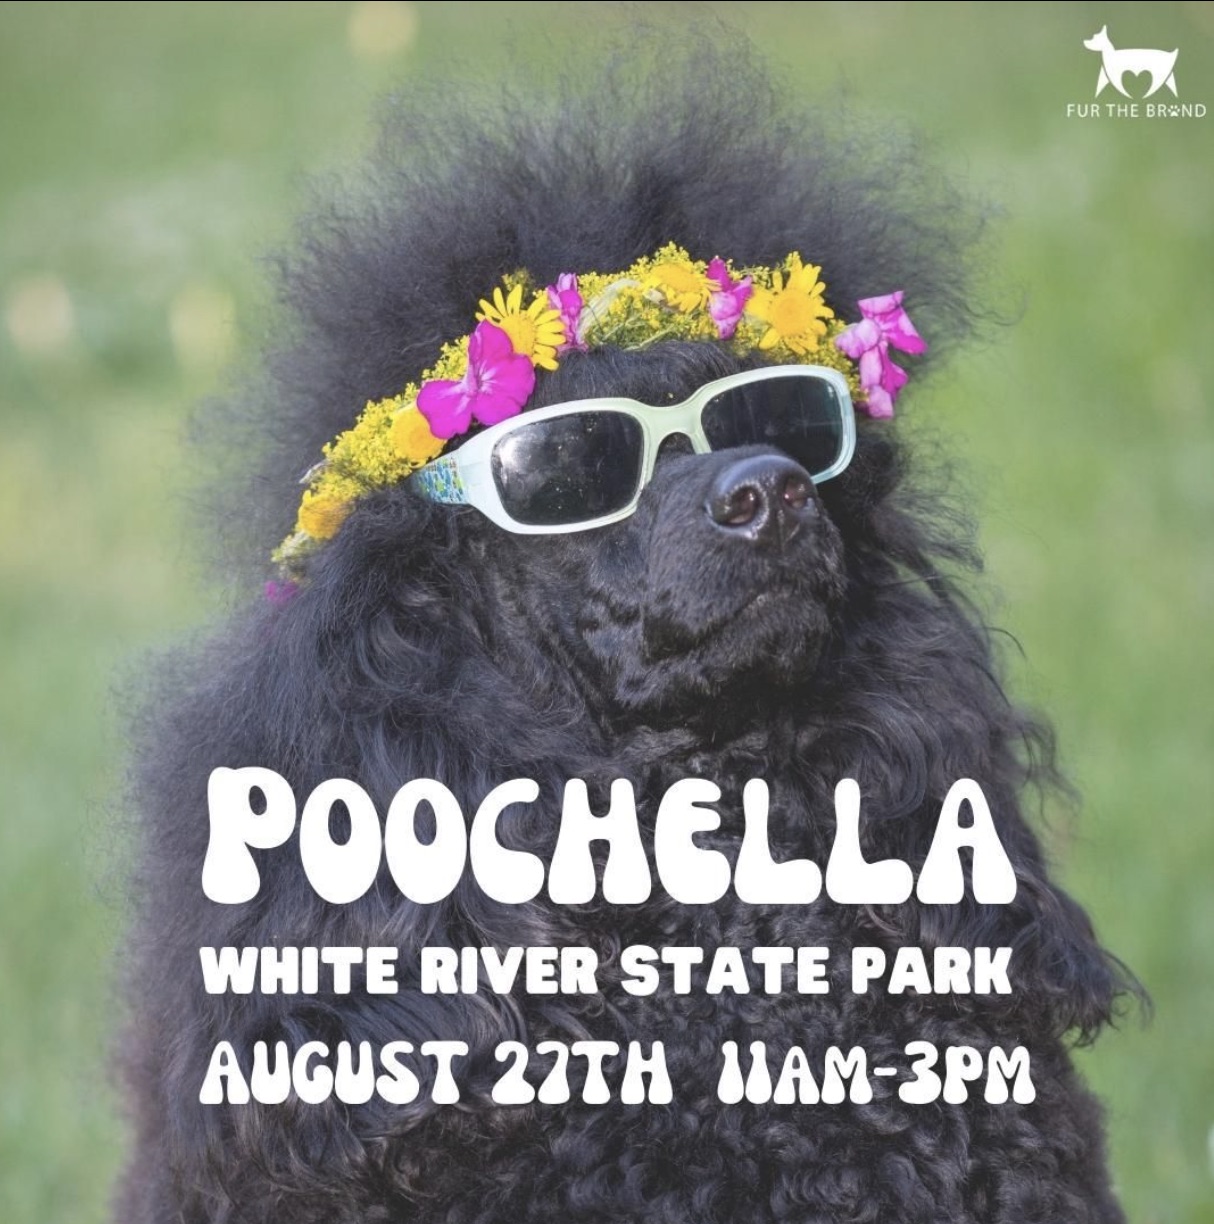 Poochella festival graphic with a poodle